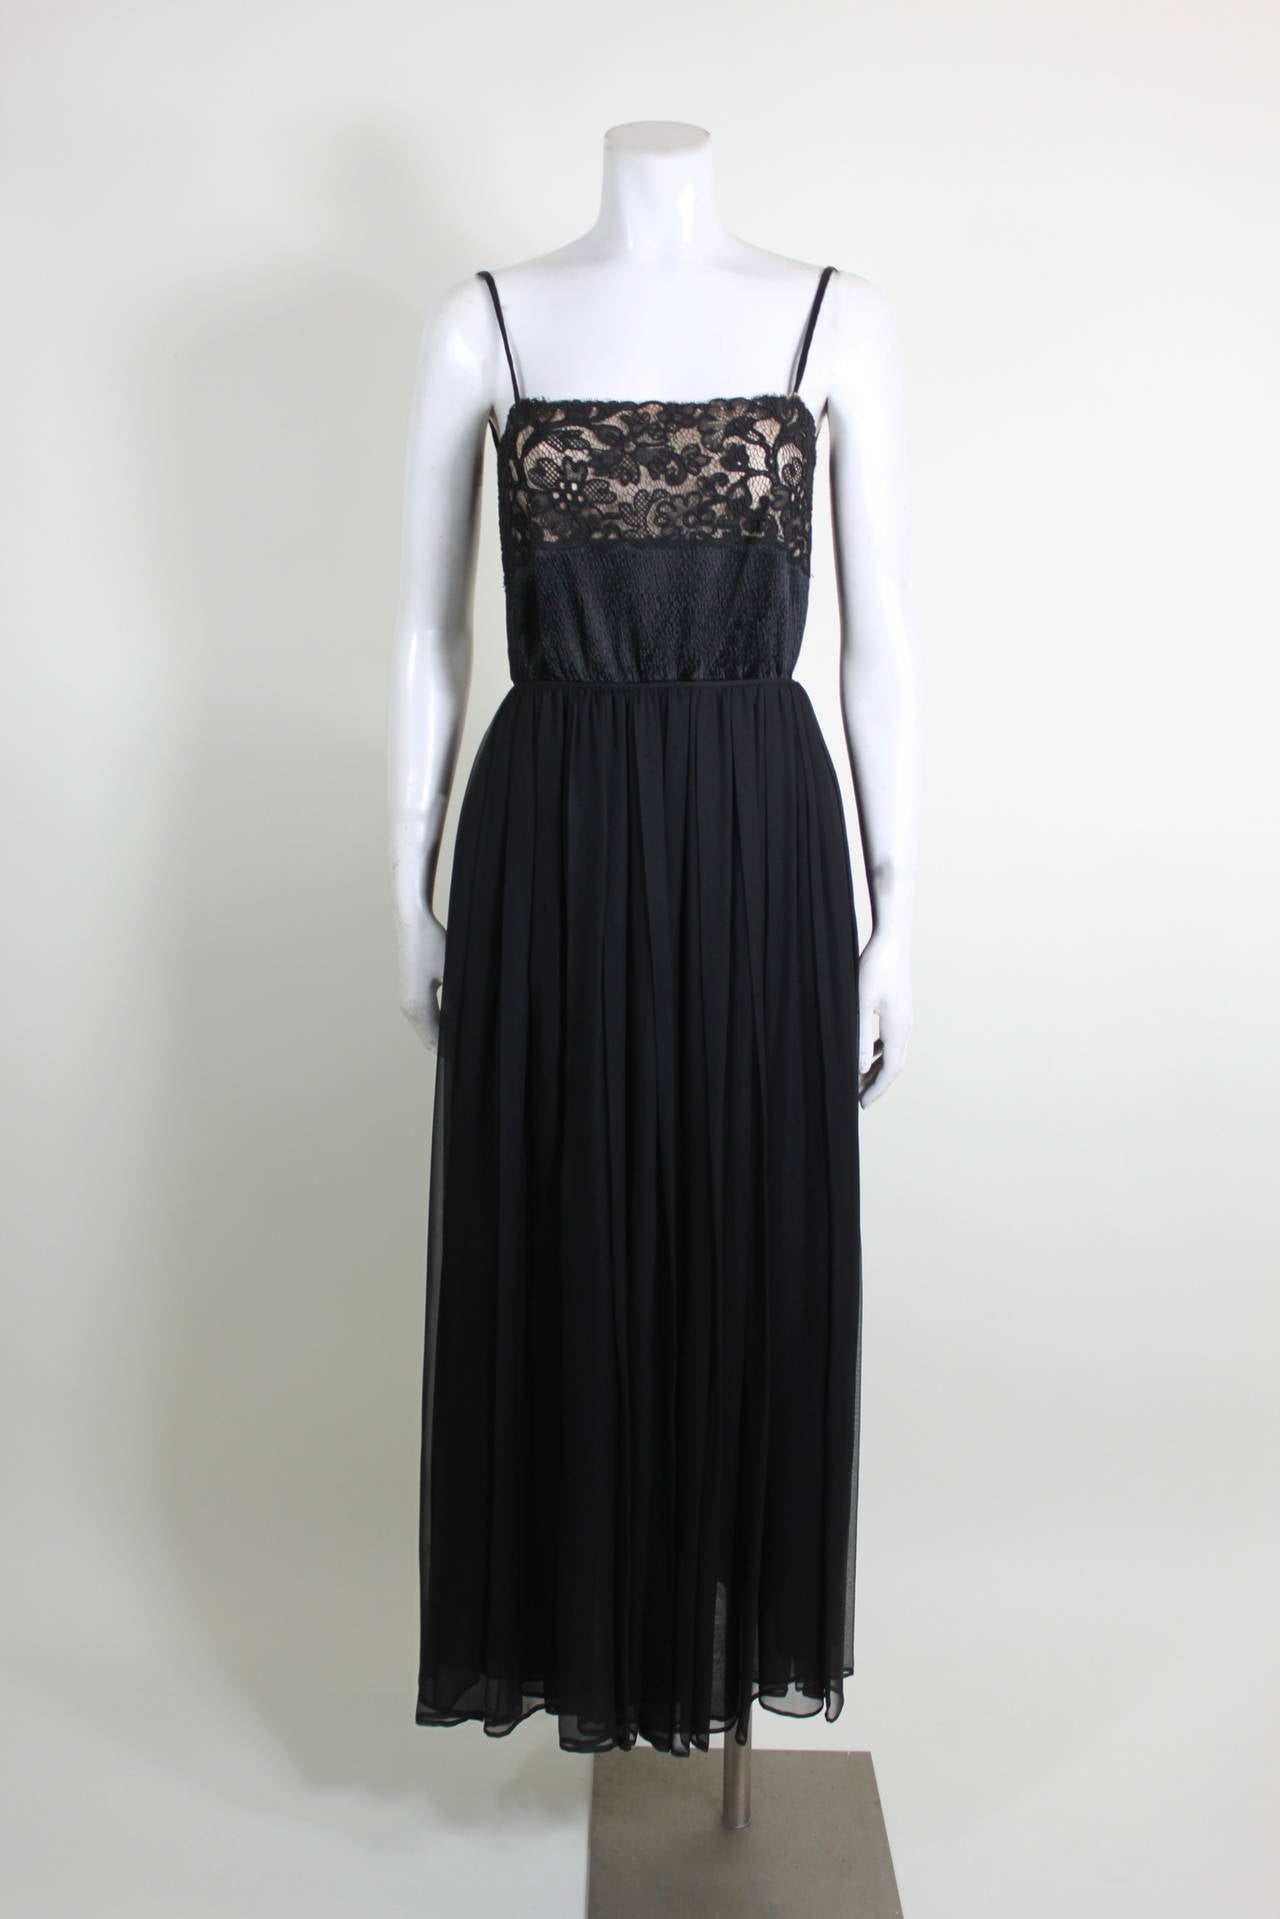 An ultra sexy evening gown from Galanos done in silk. Featuring a black lace on nude bodice, the skirt is made of luxe flowing chiffon. The back is cut low and ties. Zipper back closure. 
